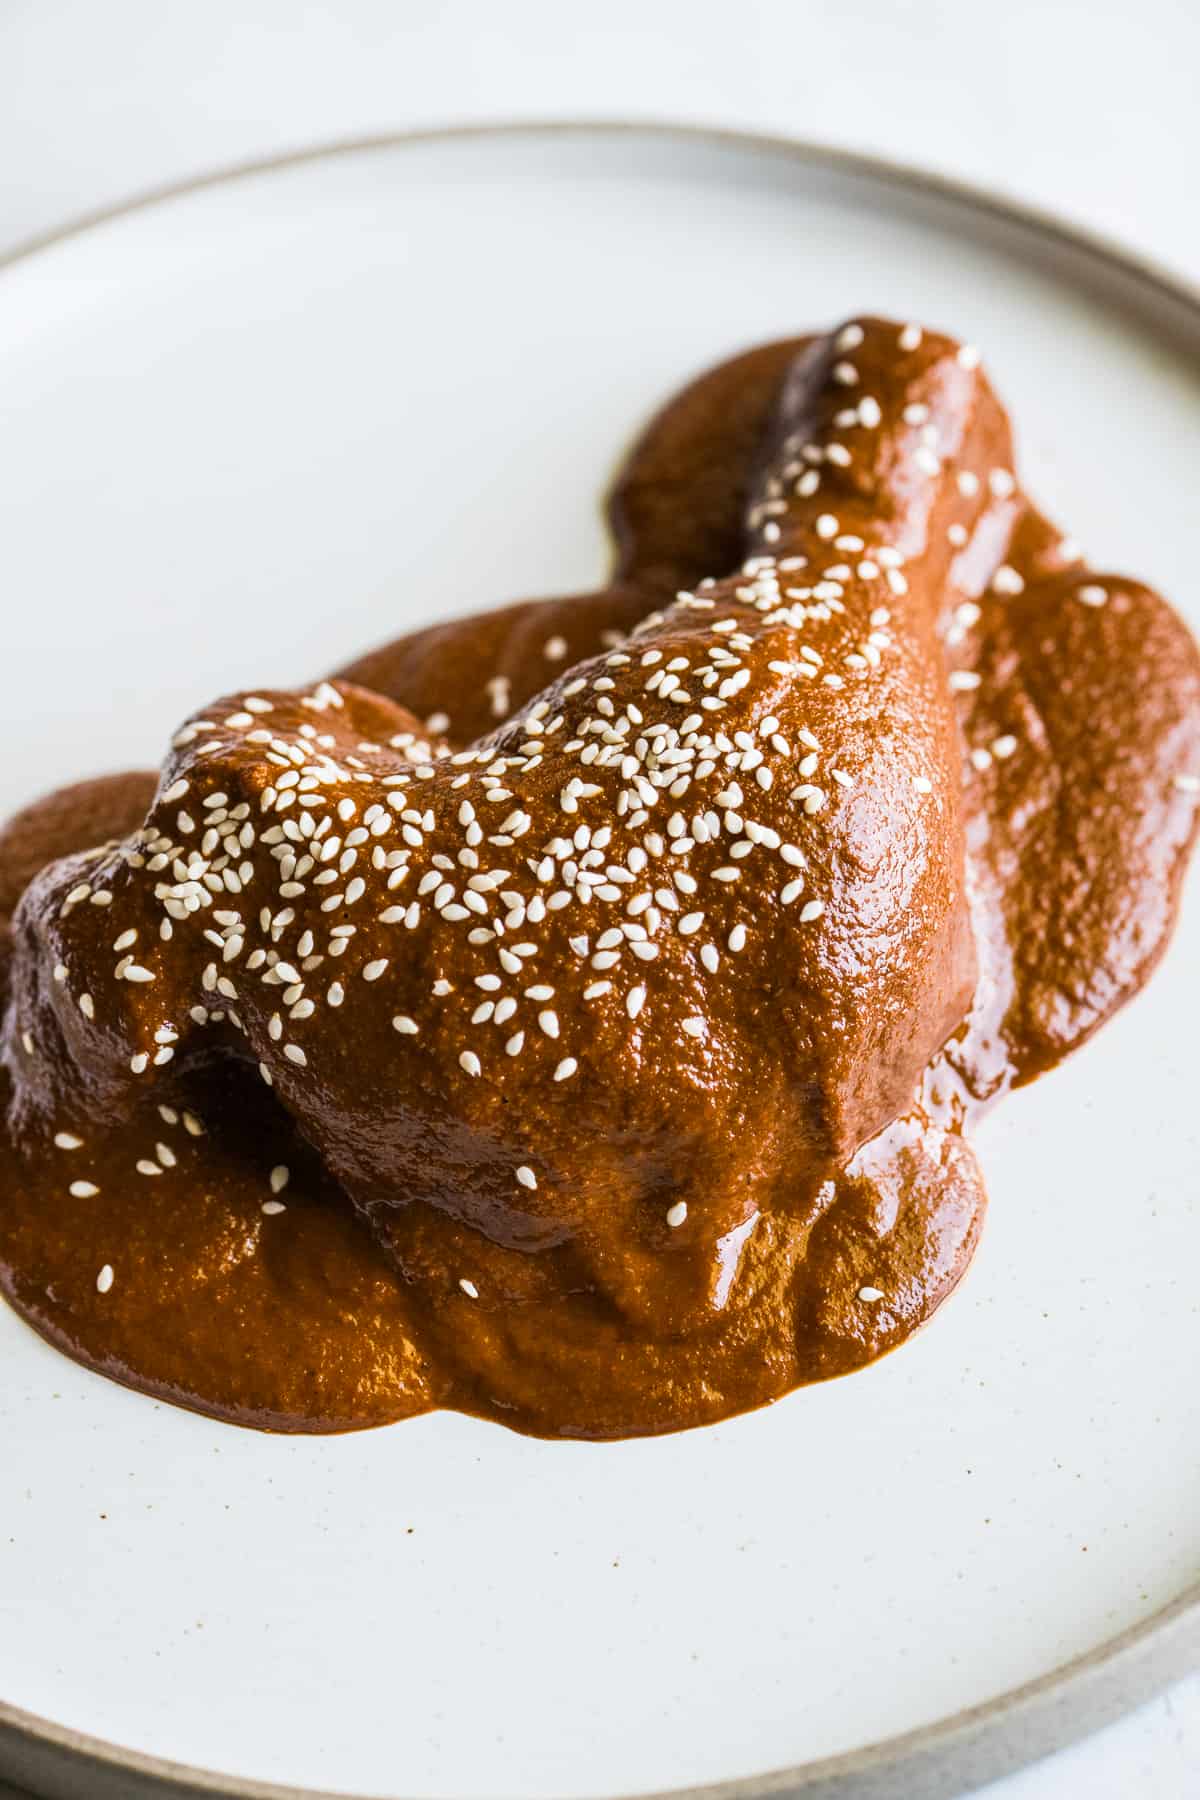 Mole sauce on chicken garnished with sesame seeds.